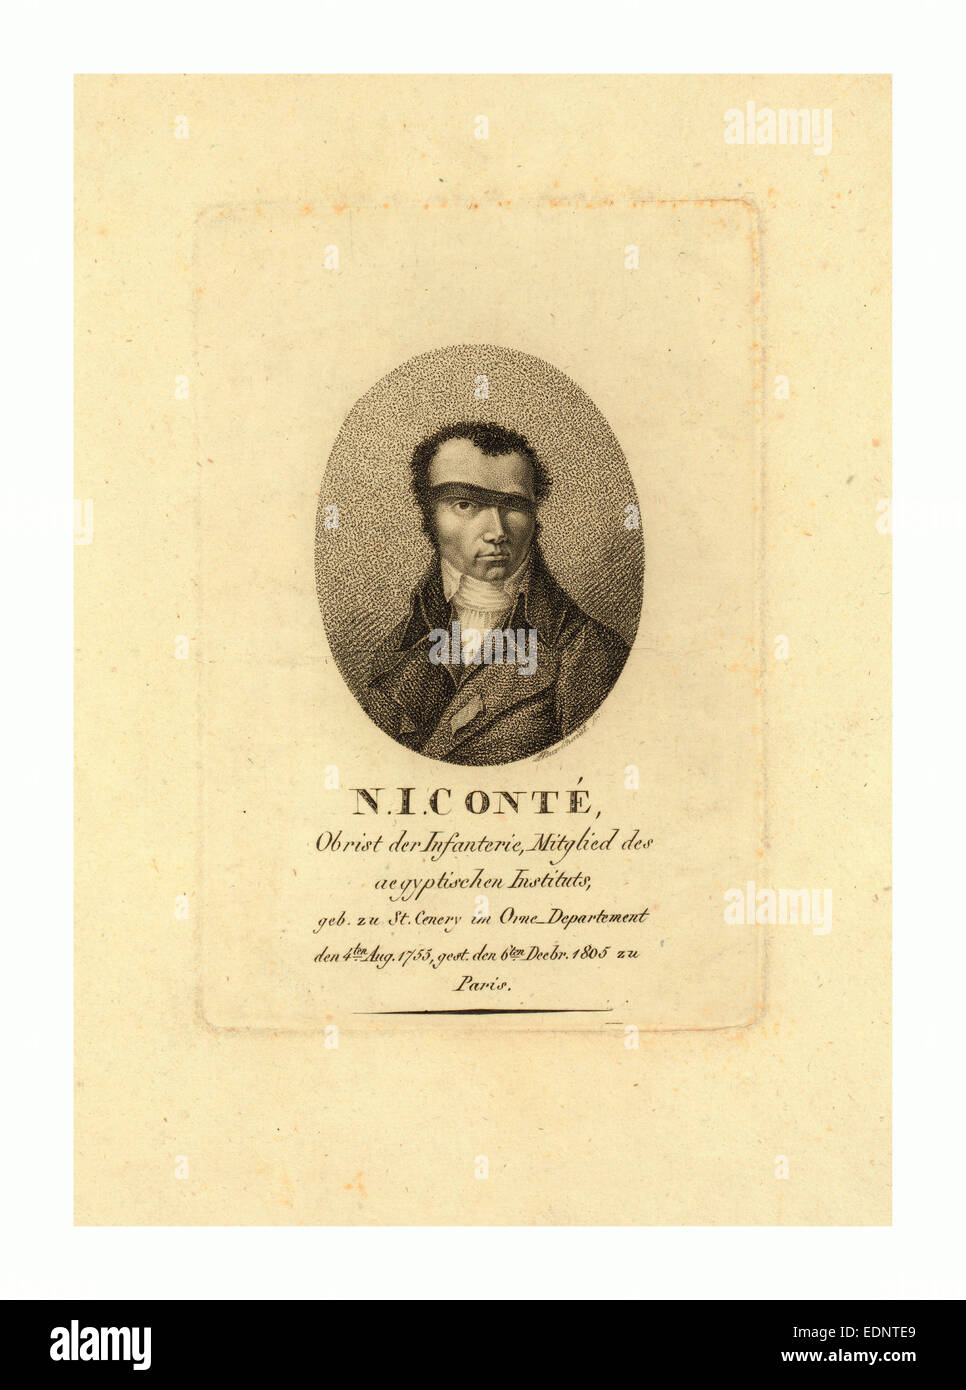 Head-and-shoulders portrait of Nicolas Conte, 1755  1805, who experimented with the use of hydrogen for balloons. Stock Photo